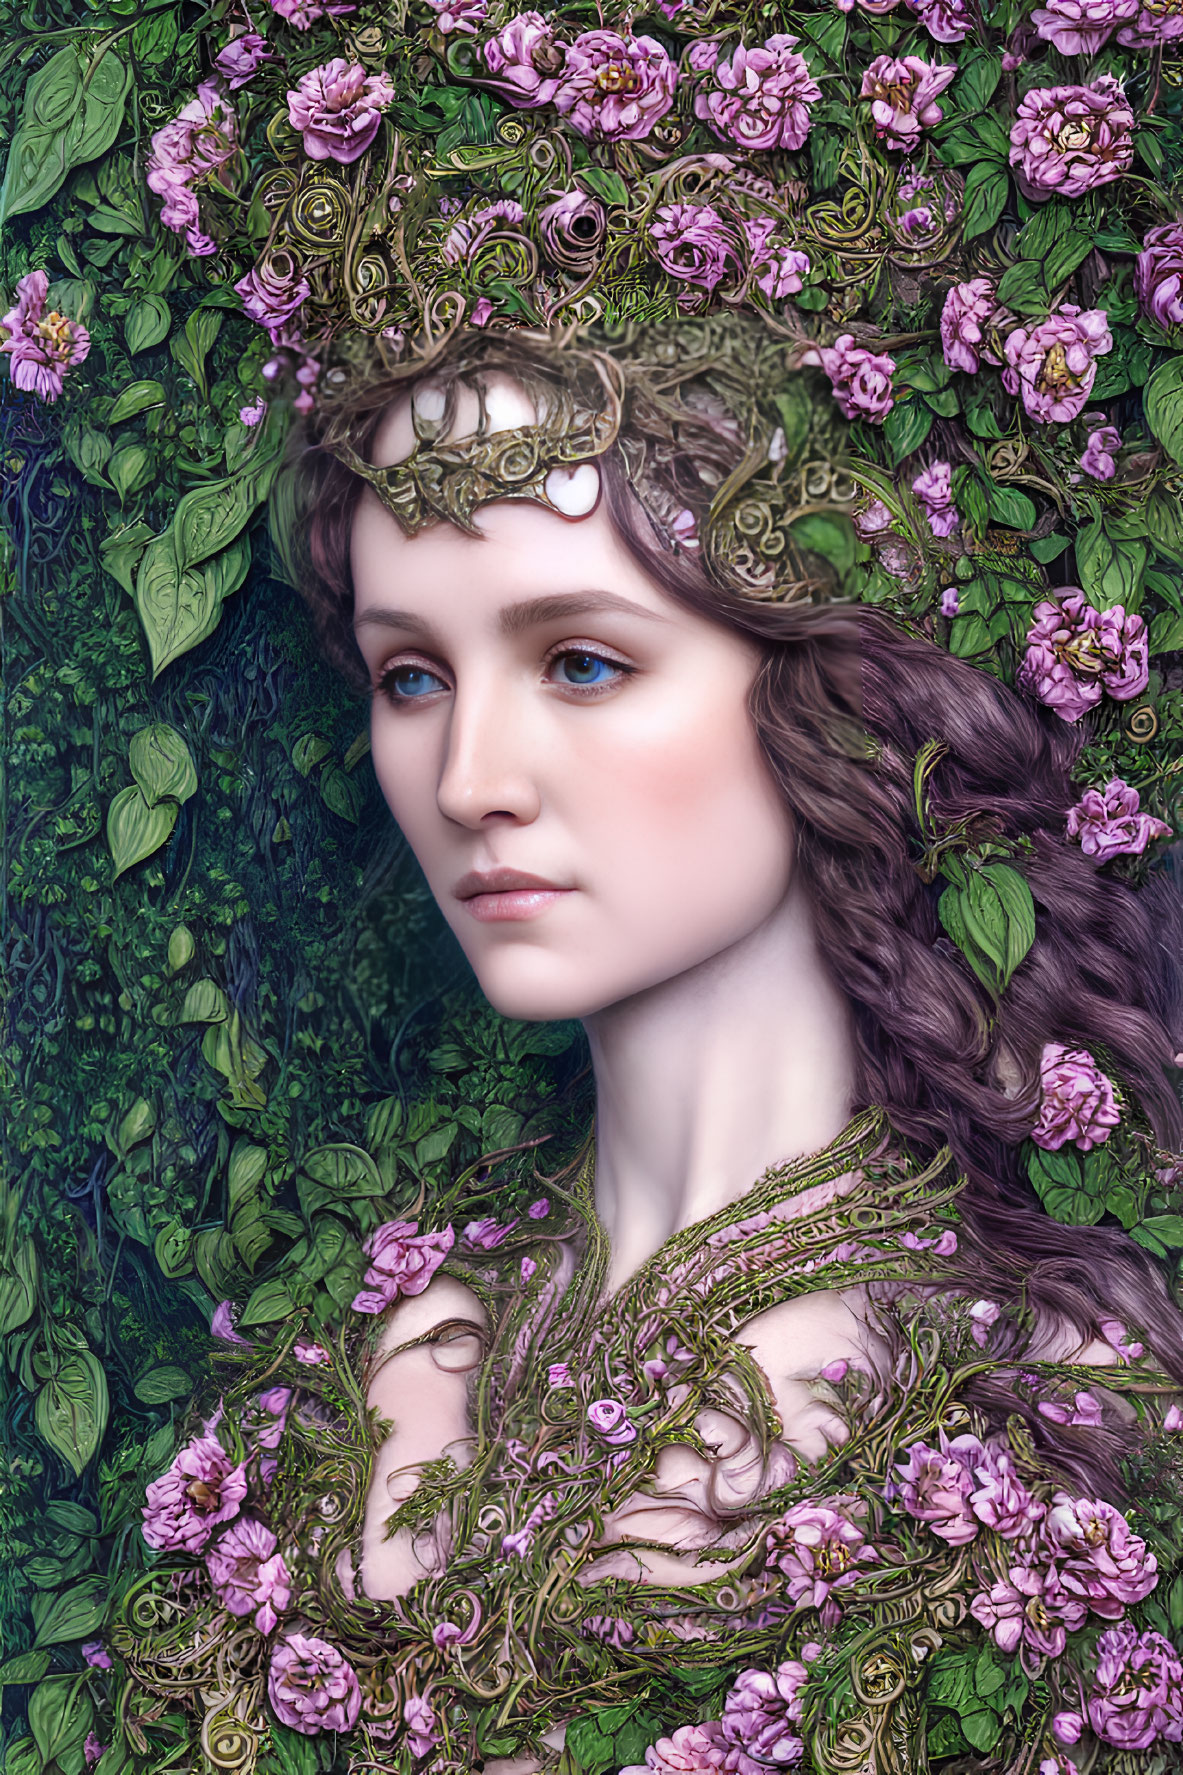 Portrait of a woman with floral headpiece and collar in nature setting